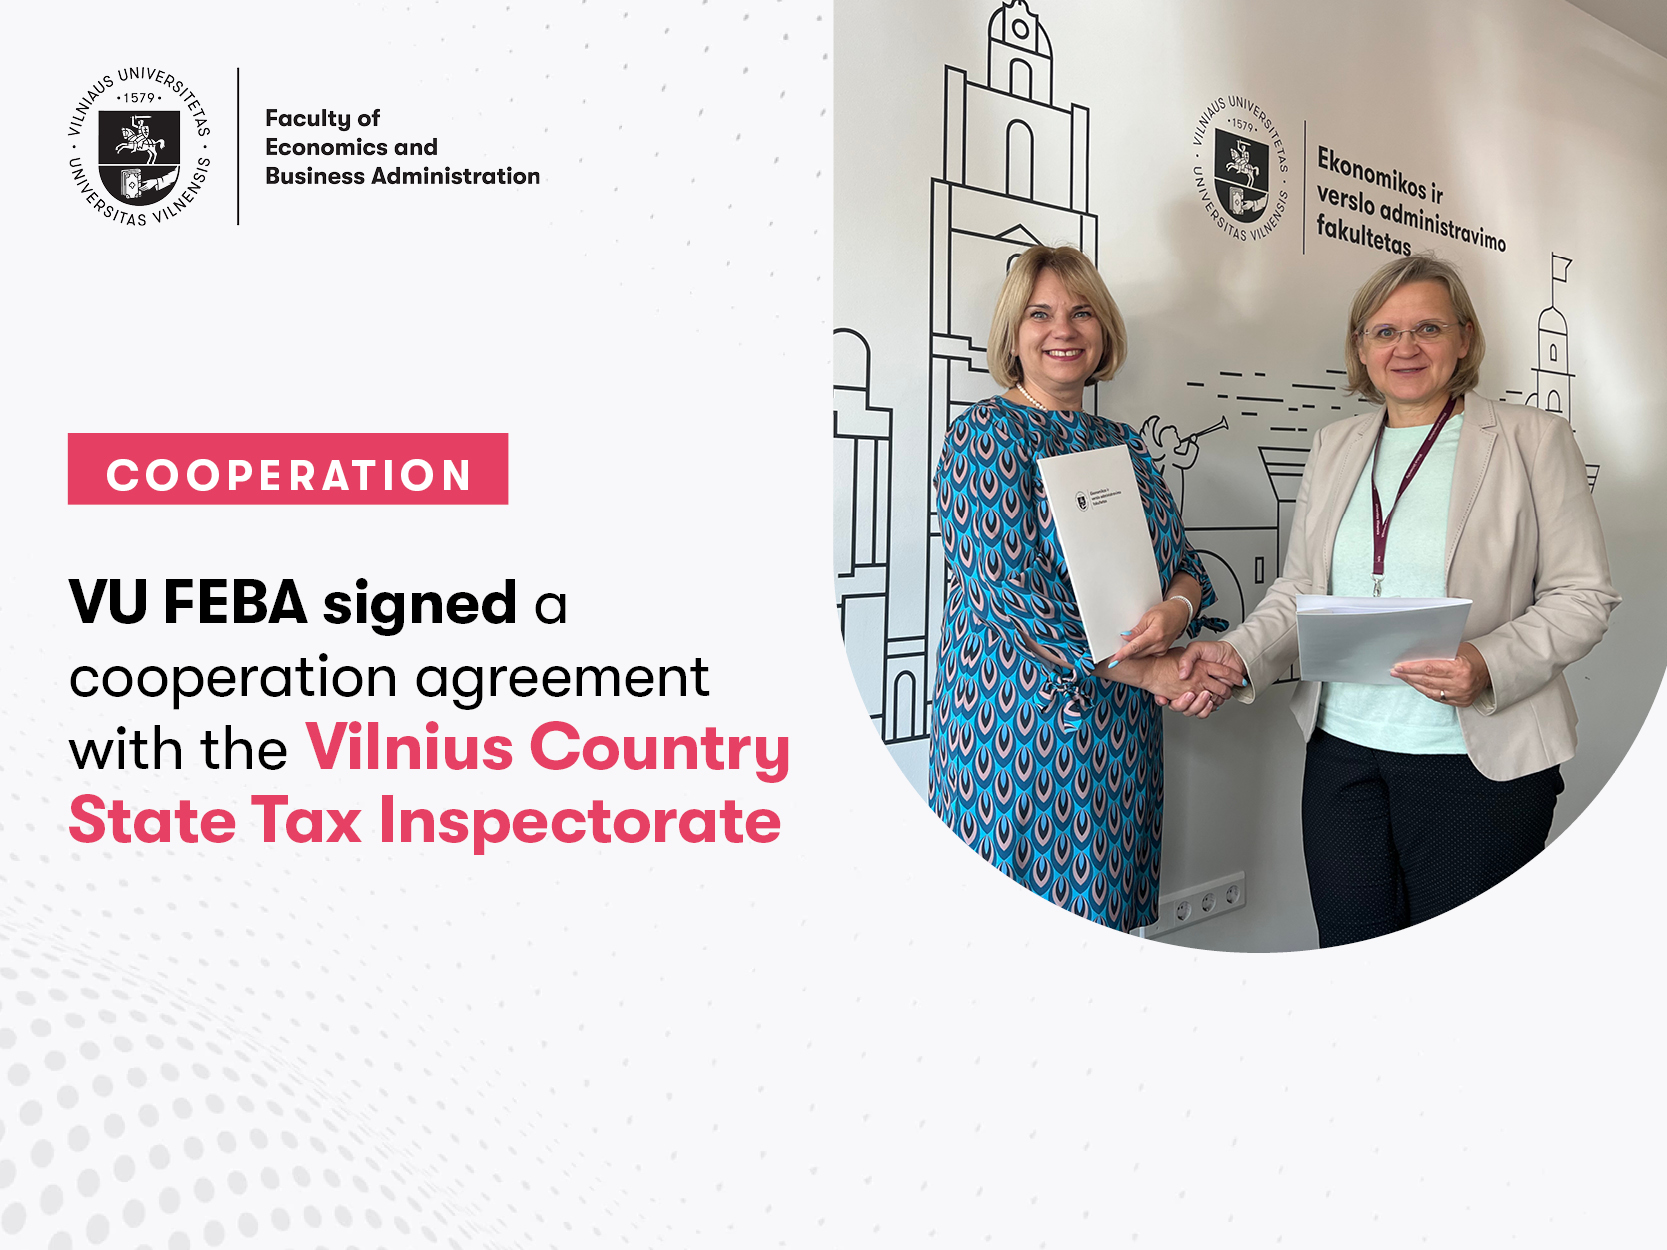 The agreement was signed by Virginija Ginevičienė, the Head of the State Tax Inspectorate of Vilnius County, and prof. dr. Aida Mačerinskienė, the Dean of VU EVAF